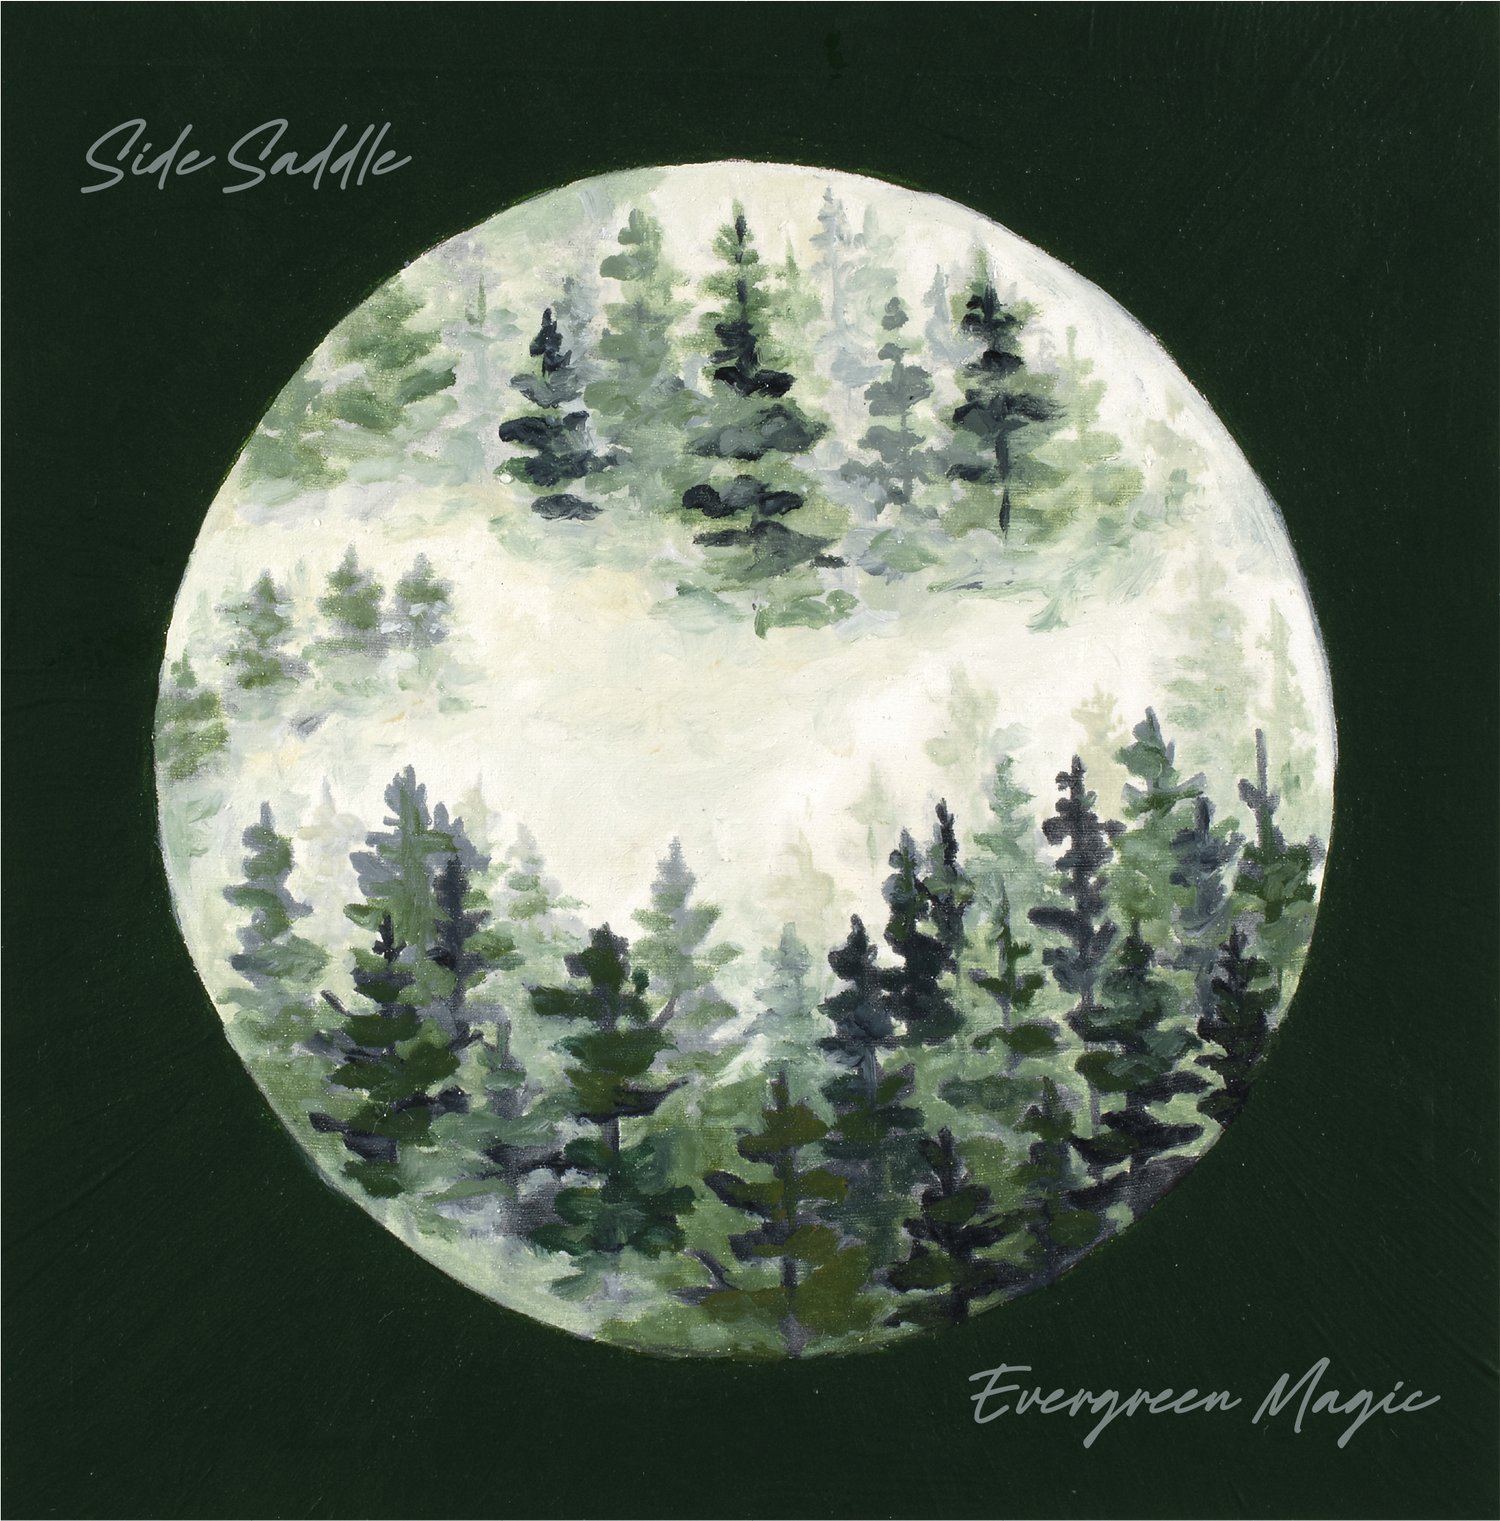 Illustrated image of a foggy evergreen forest within a circle. The area around the circle is solid black